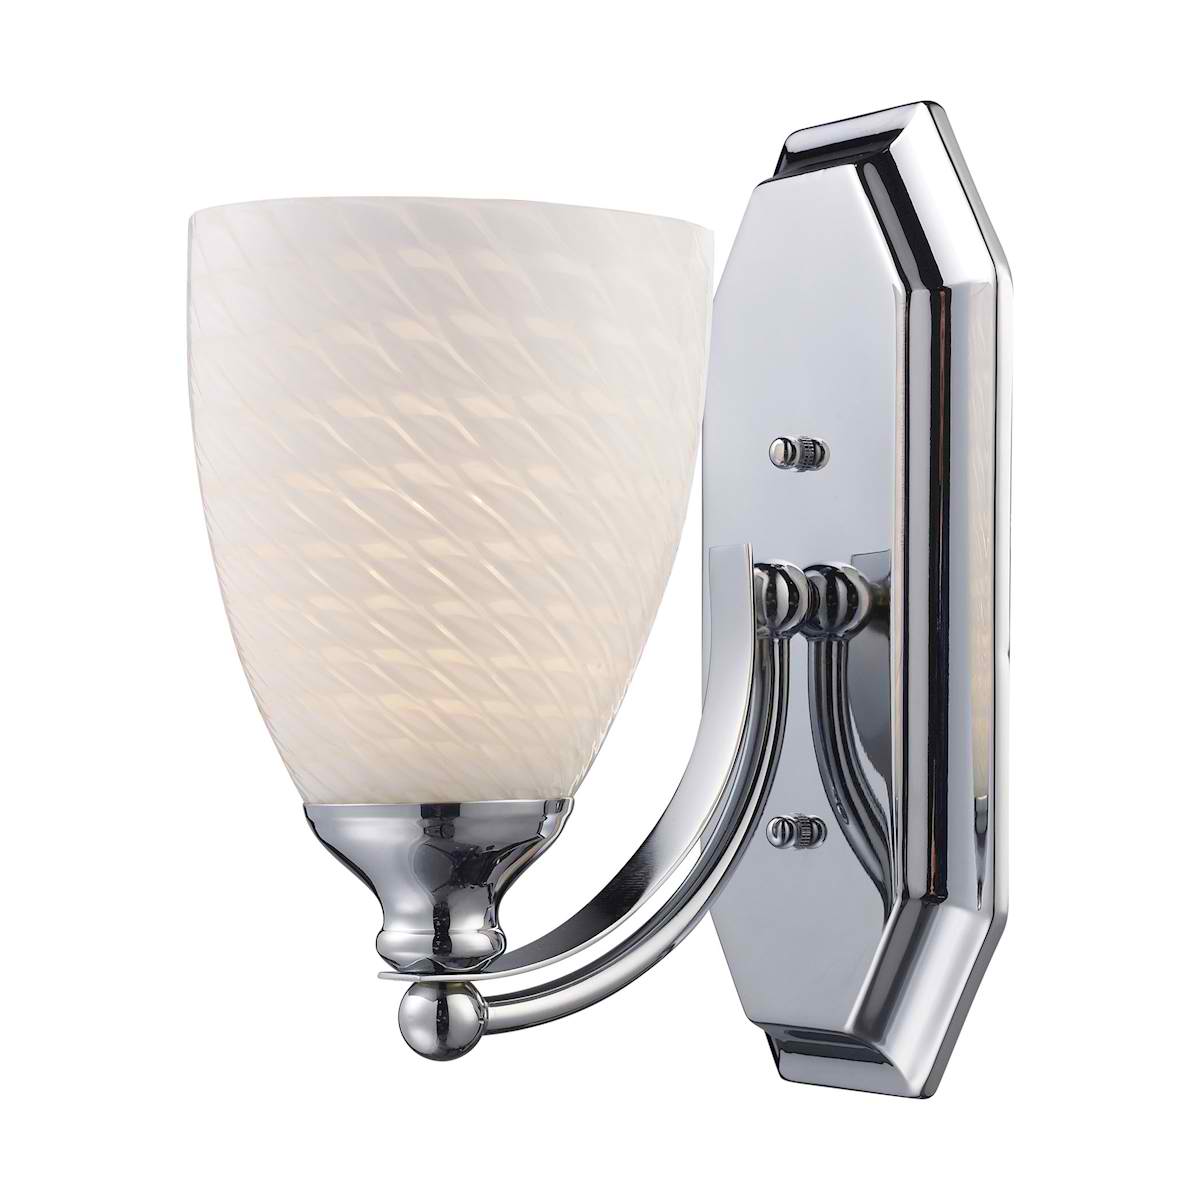 Vanity 1 Light Chrome Finish Complete with White Swirl Glass